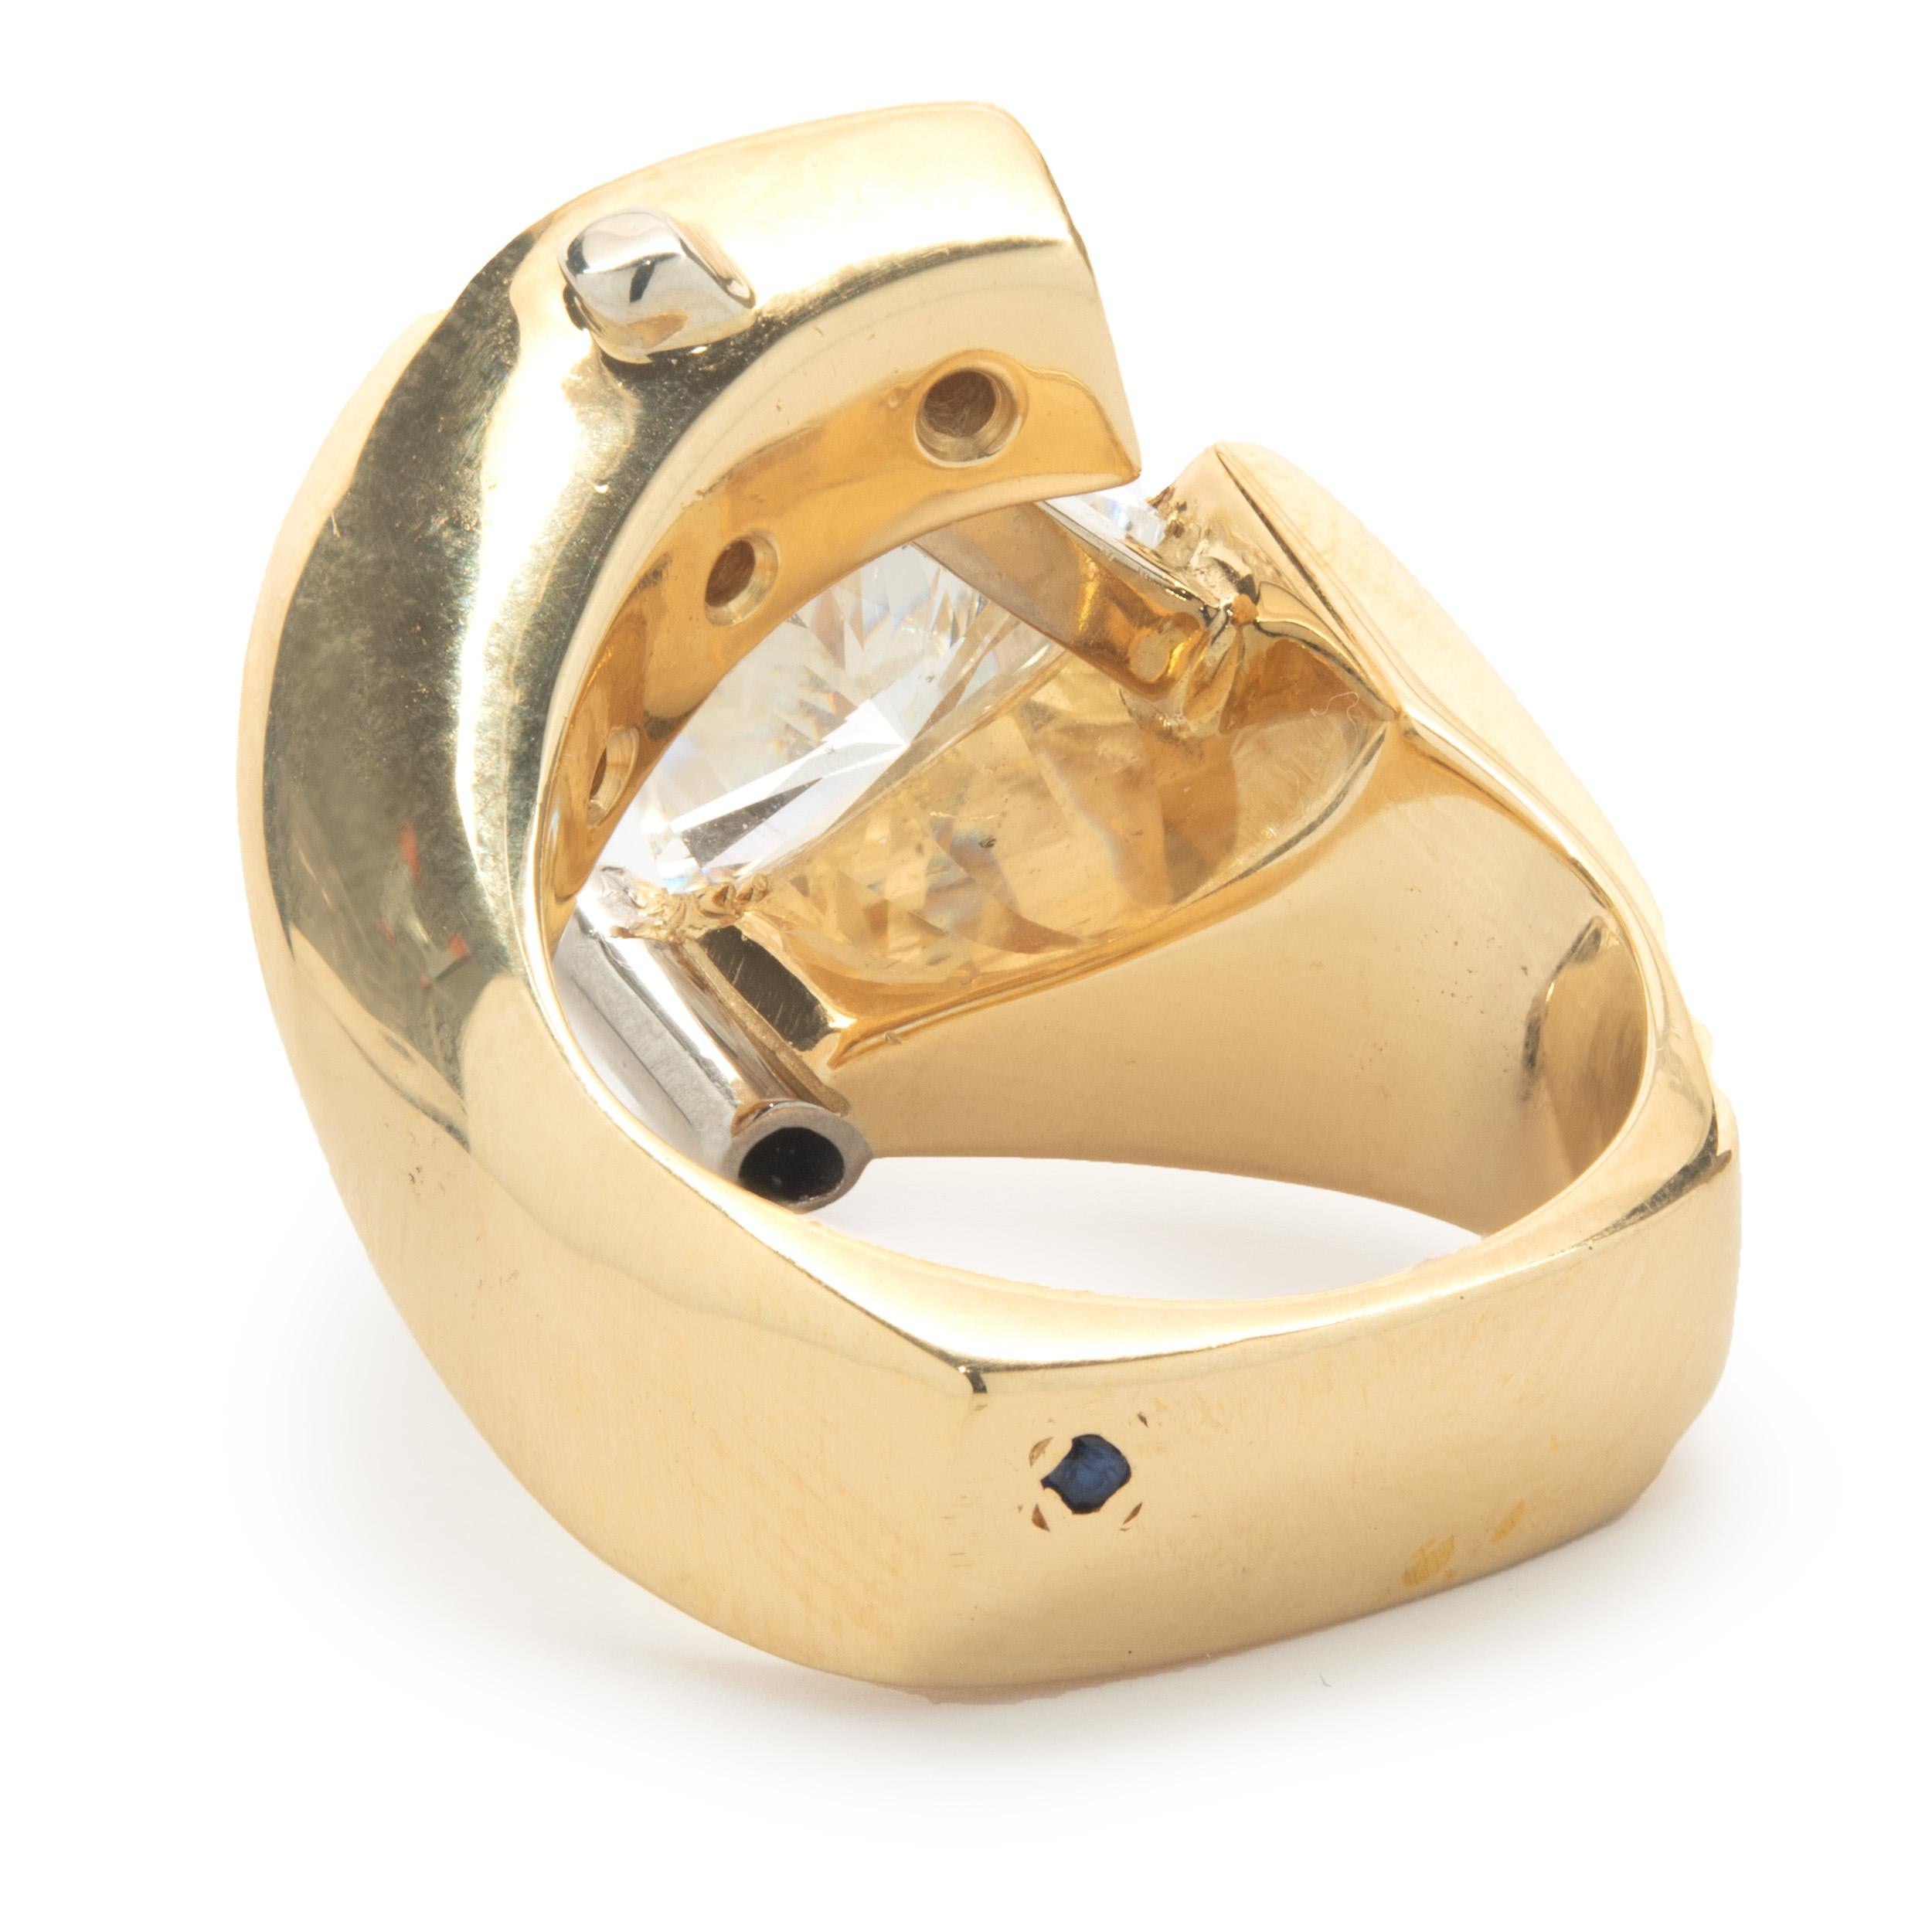 Gauthier 18 Karat Yellow Gold Trillion Cut Diamond Engagement Ring In Excellent Condition For Sale In Scottsdale, AZ